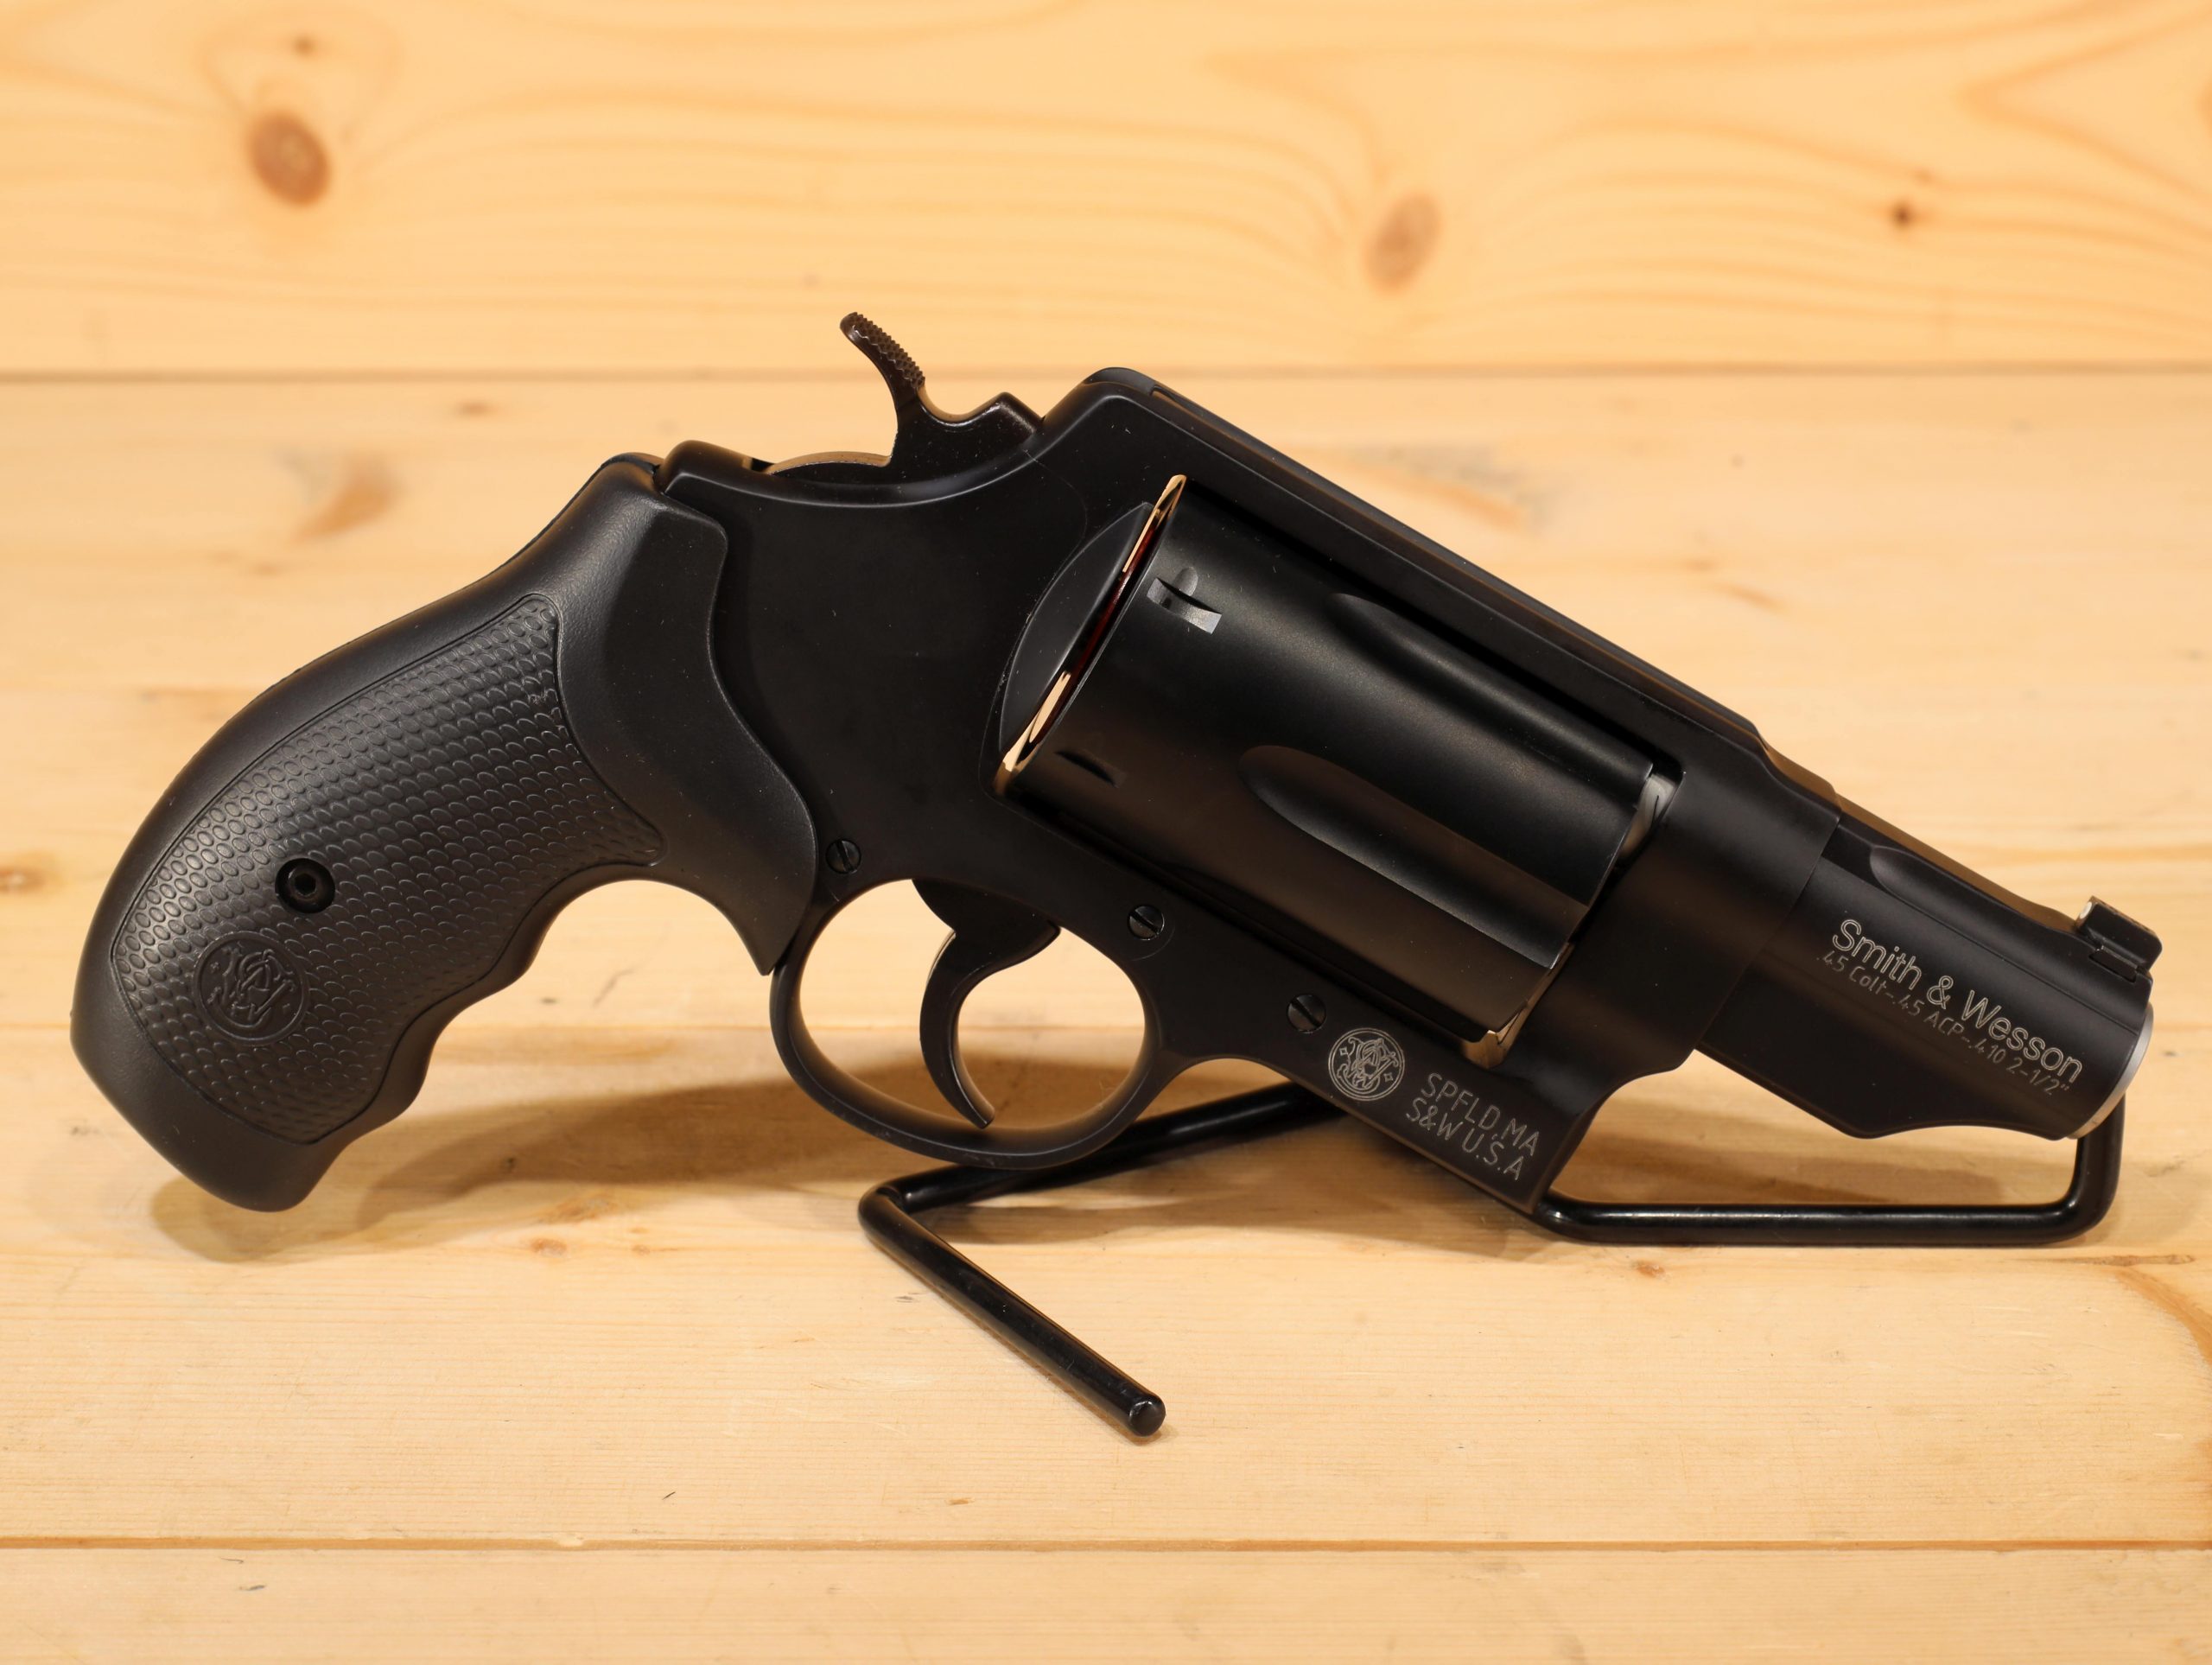 smith and wesson revolvers 45